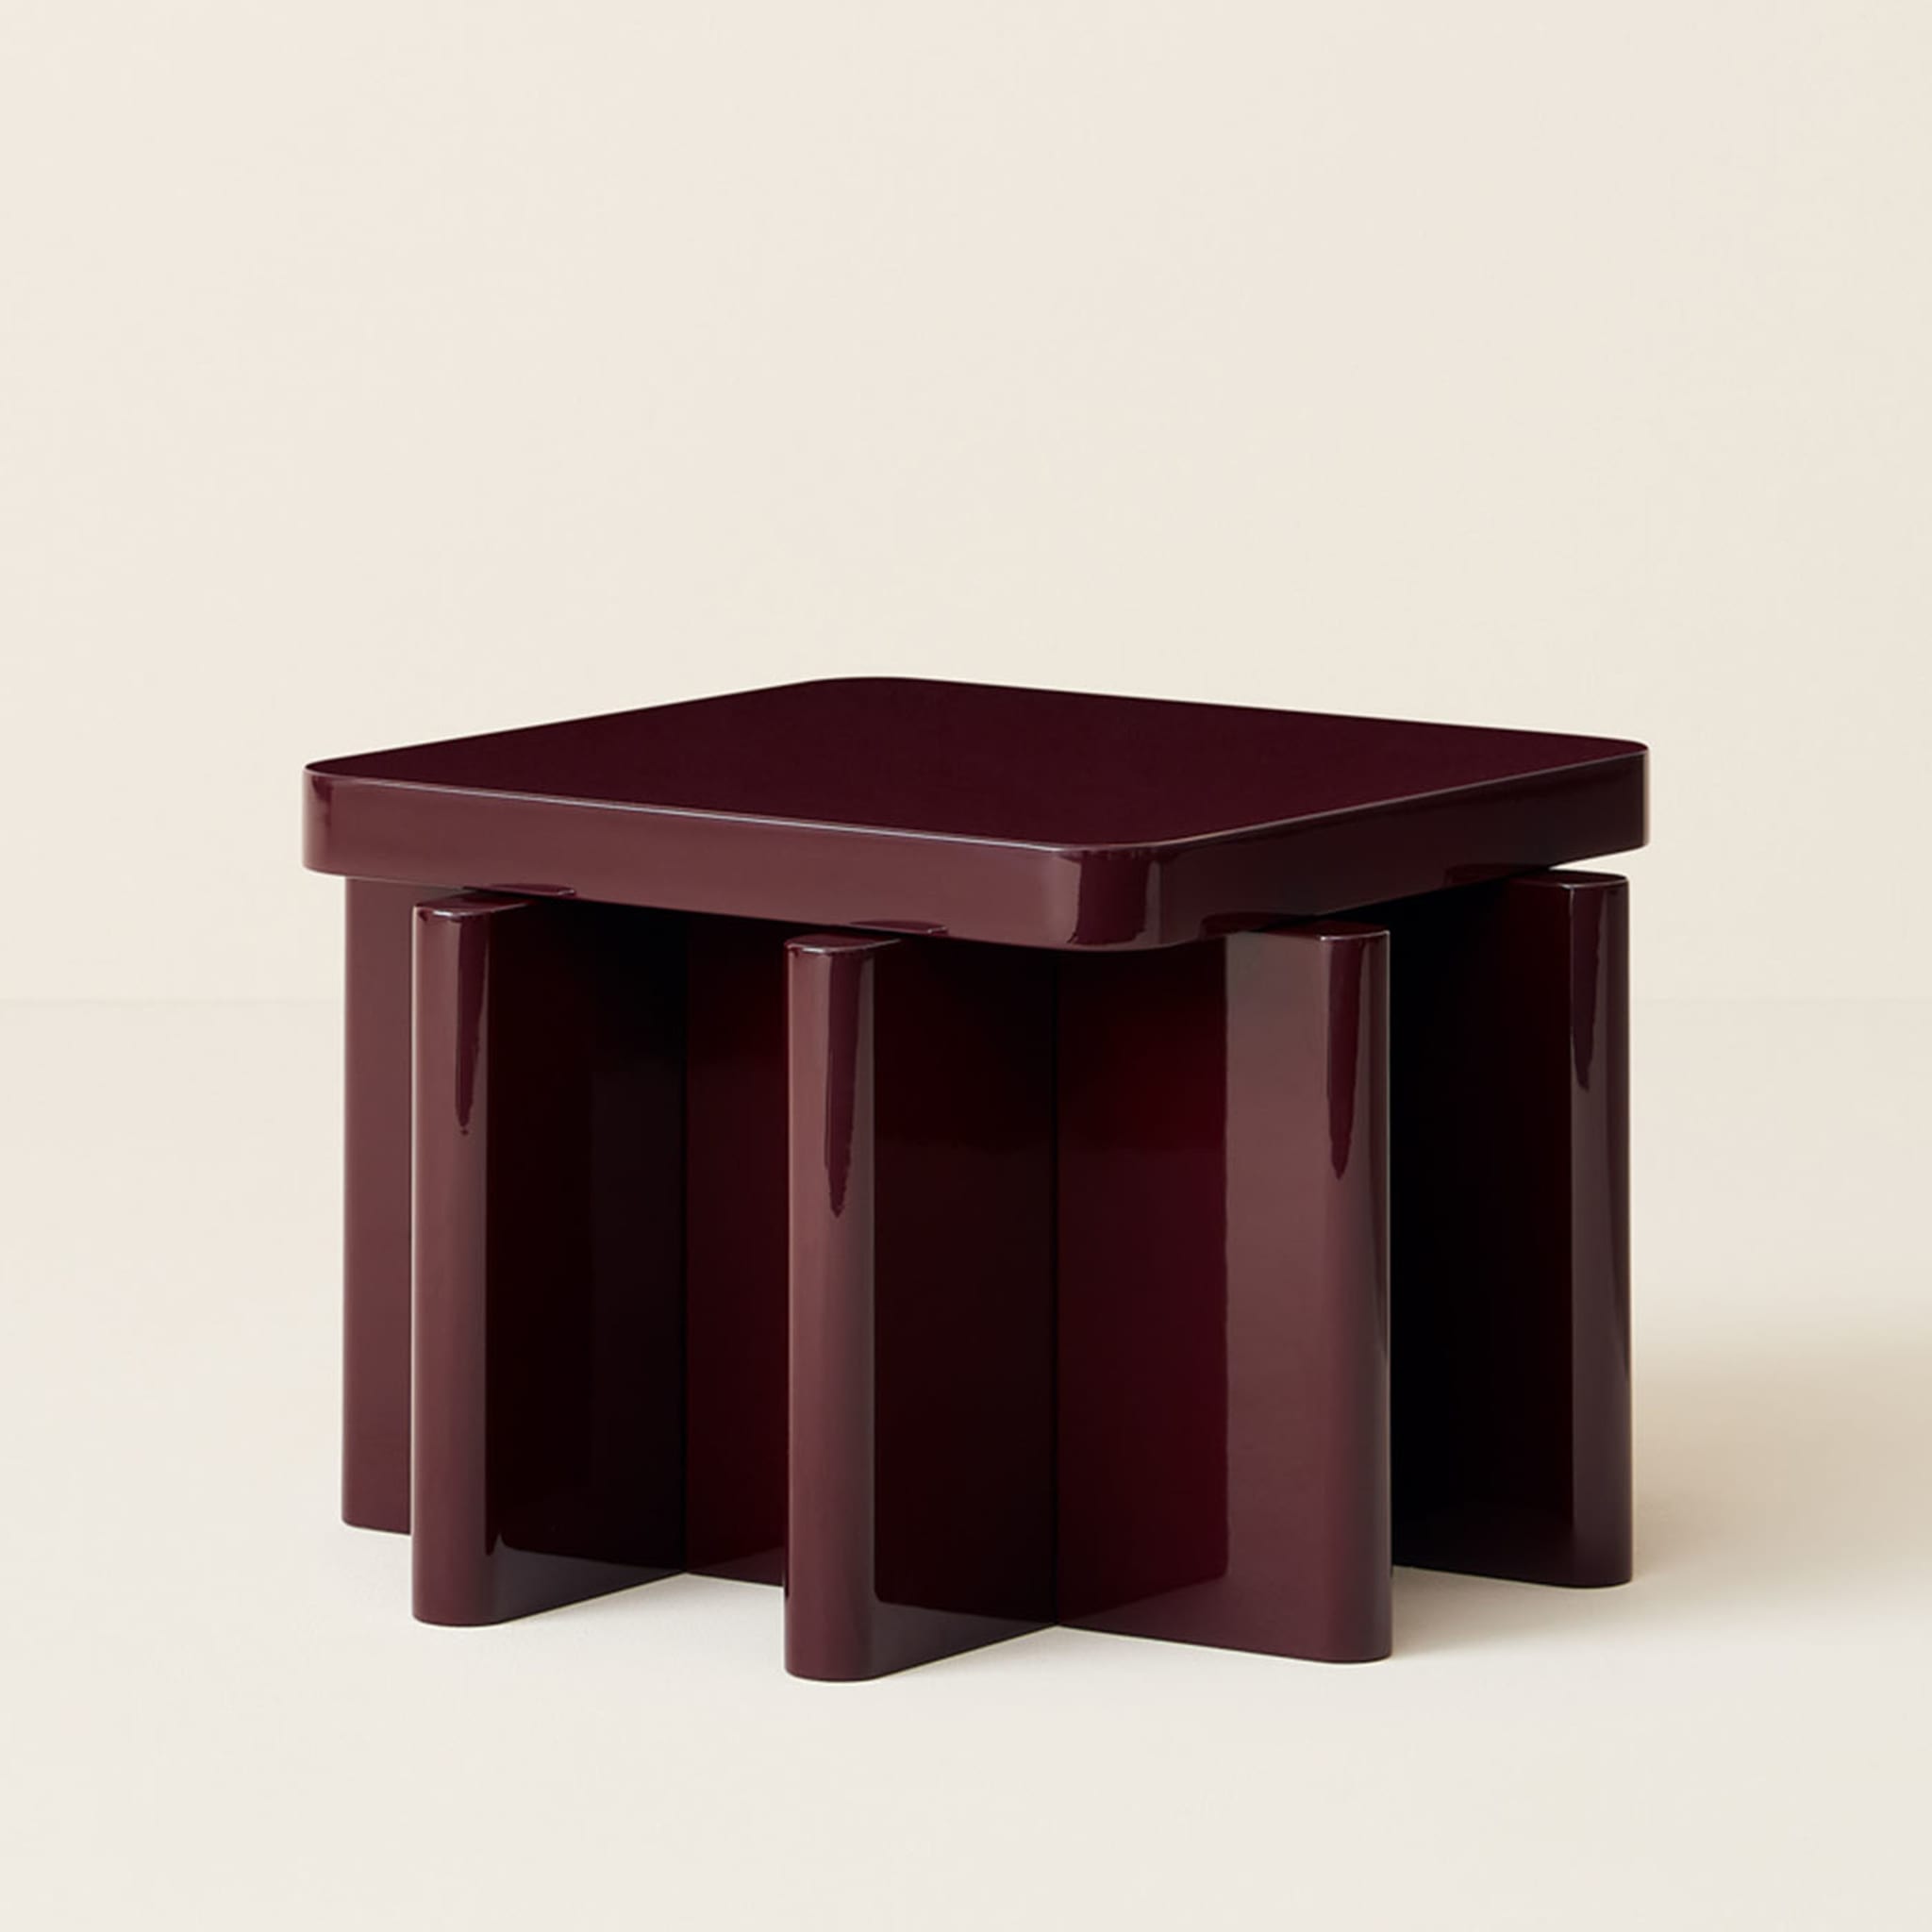 Spina Bordeaux Coffee Table - Alternative view 1